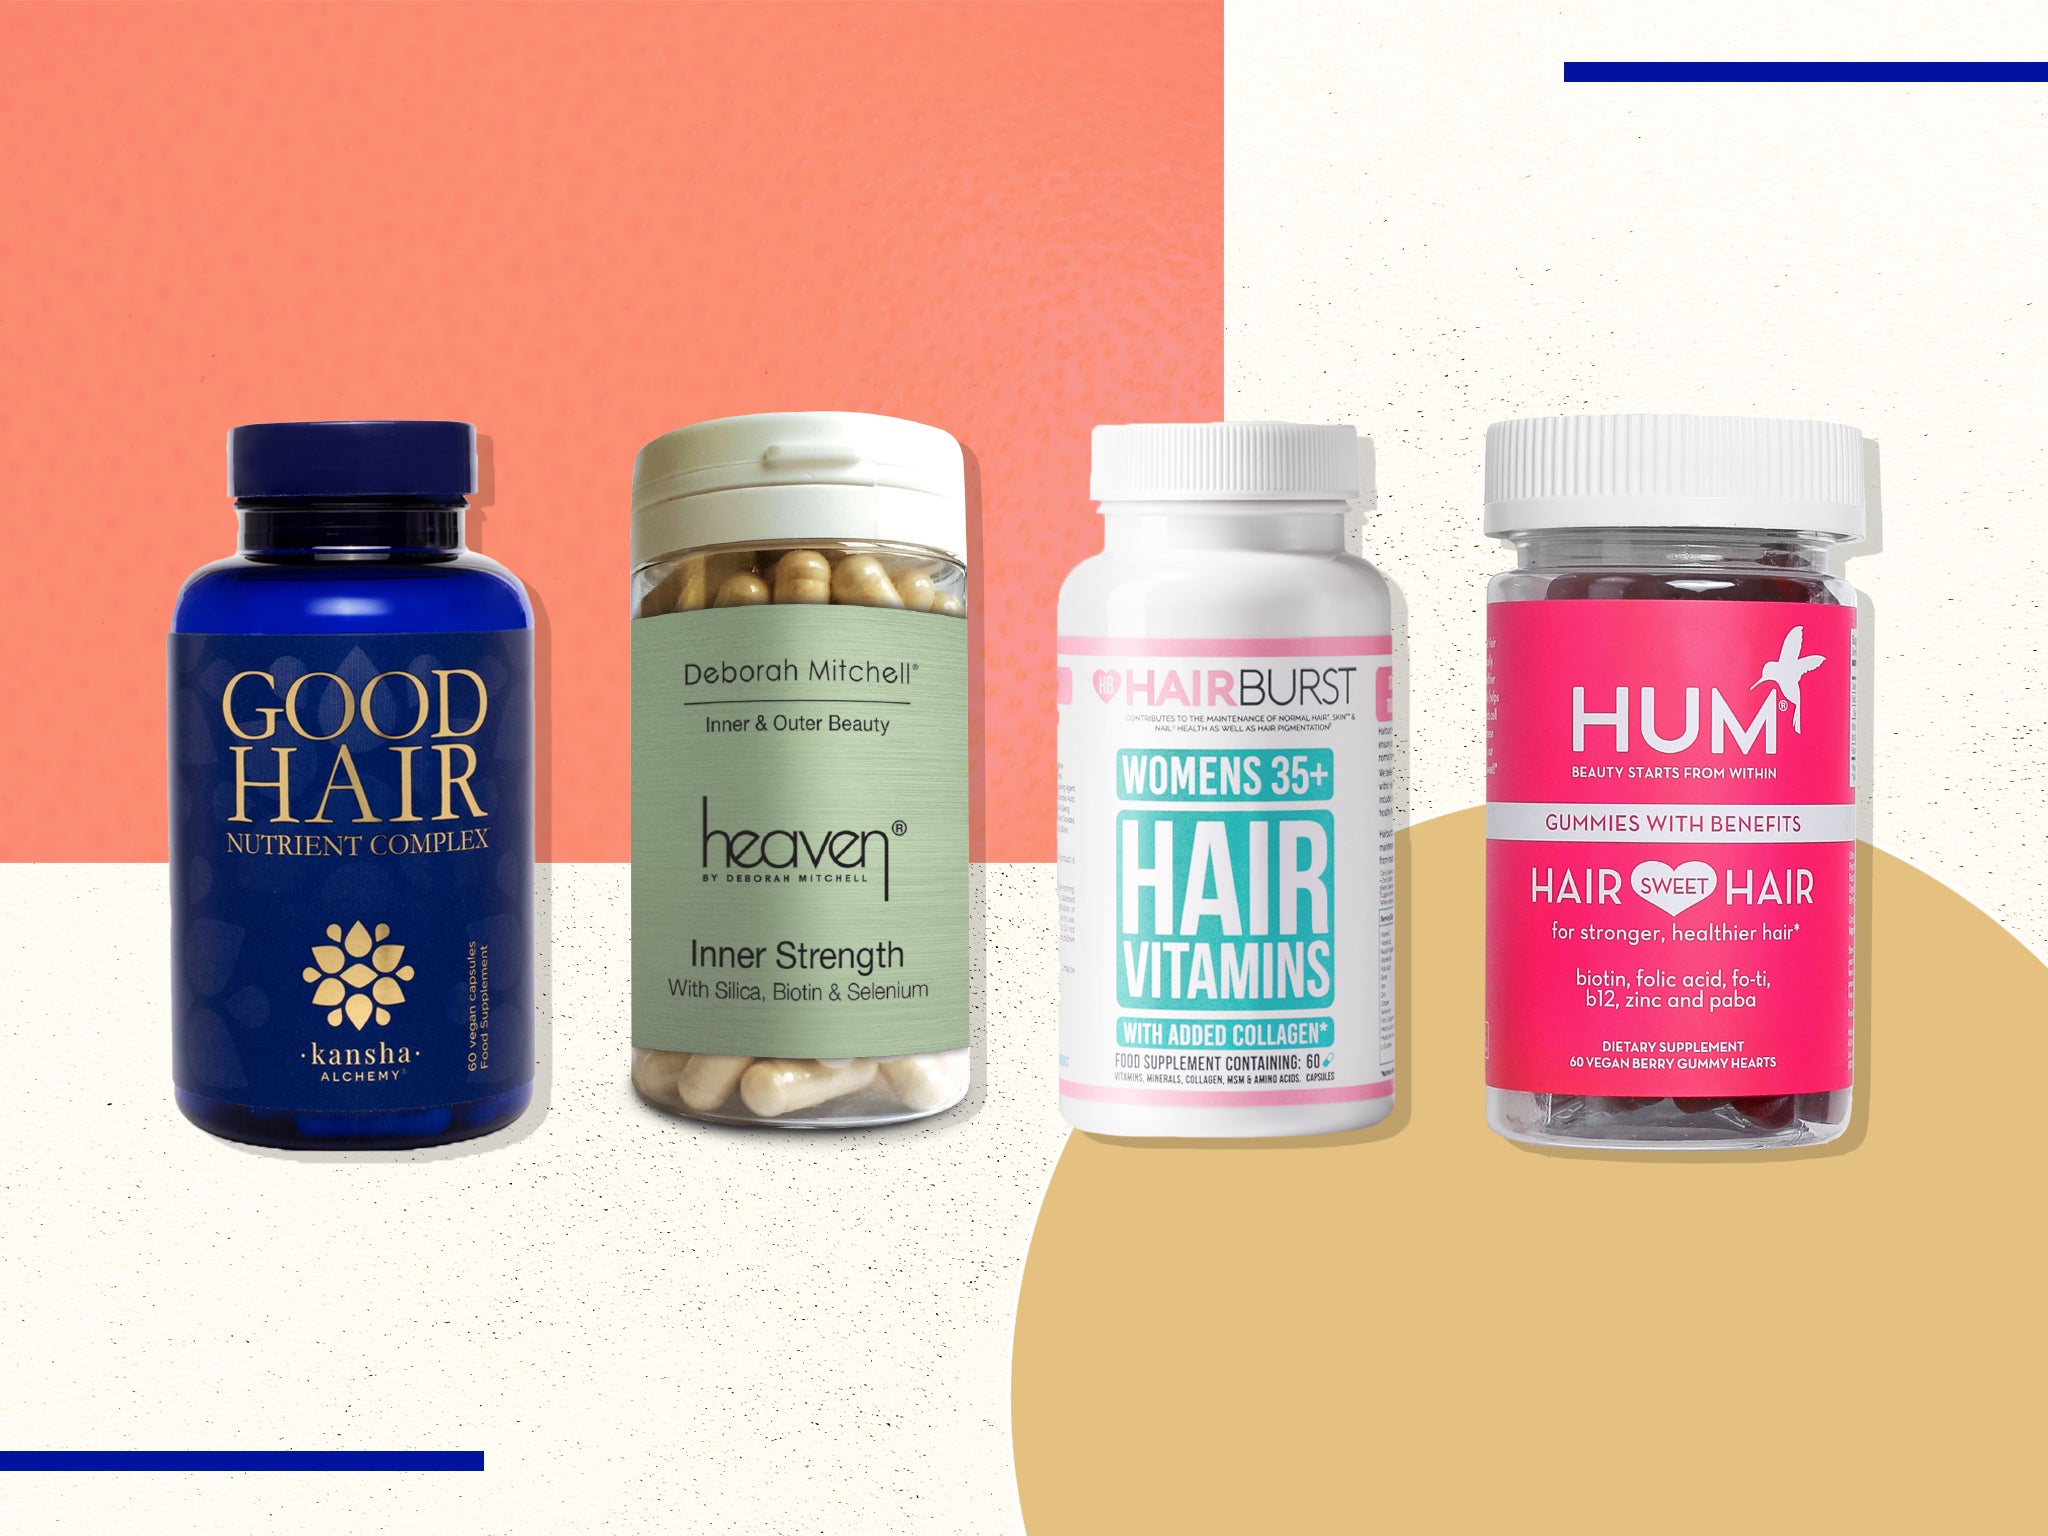 Hair experts swear by this! - JSHealth Vitamins